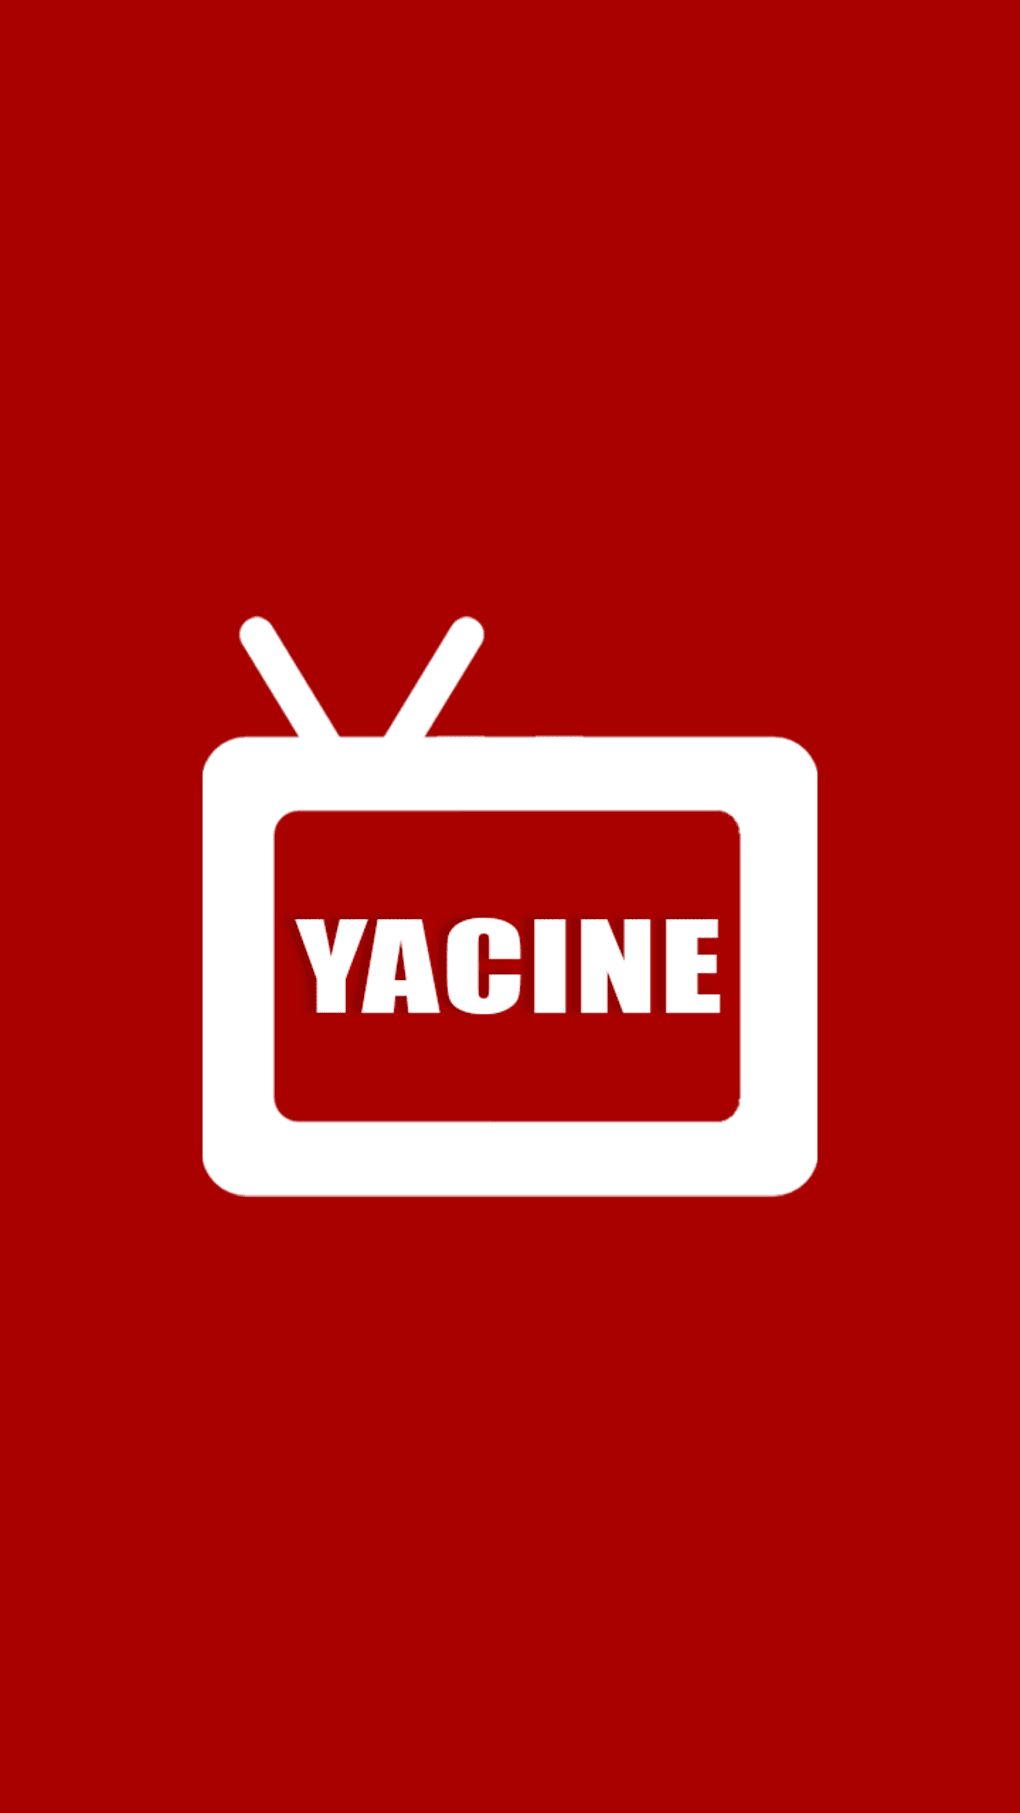 Yacine Football Score TV for Android